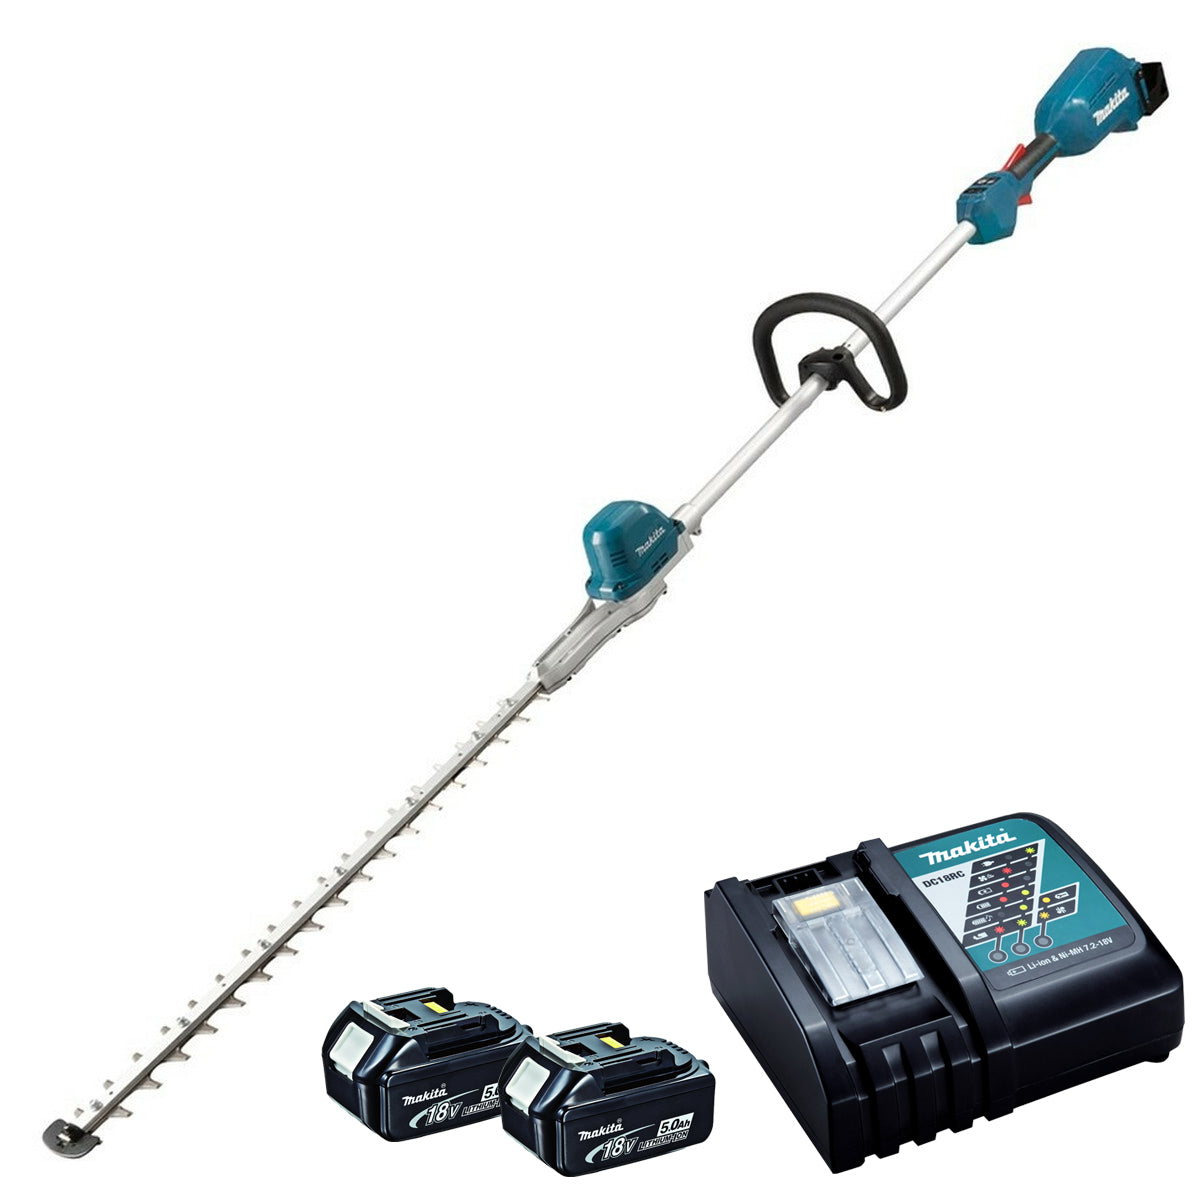 Makita DUN600LRTE 18V Brushless Pole Hedge Trimmer 60cm with 2 x 5.0Ah Batteries and Charger